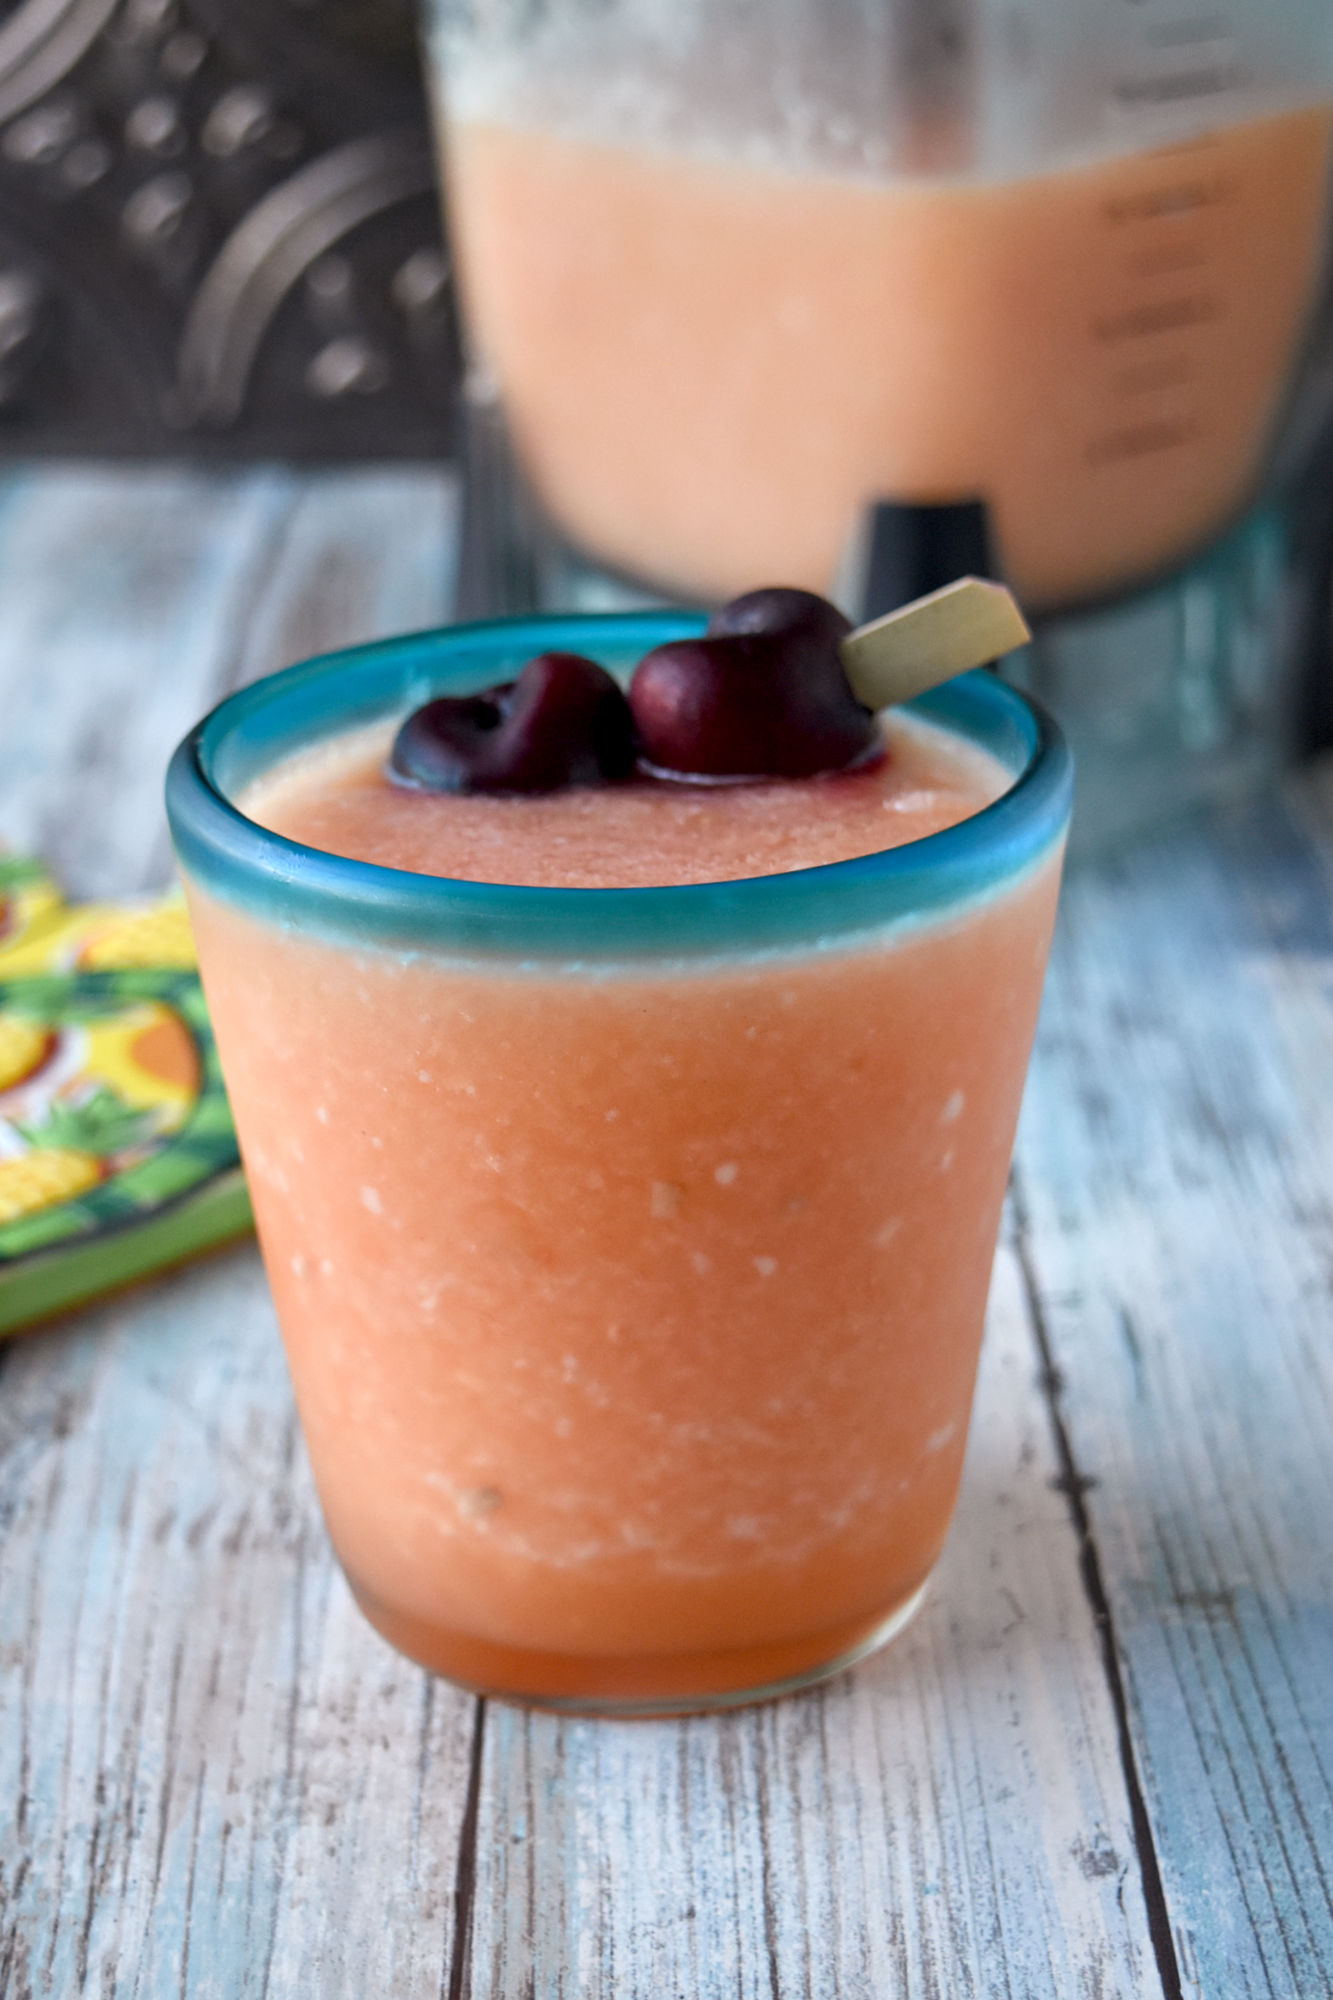 Frozen Tropical Watermelon Agua Fresca has summer sweet watermelon, pineapple, mint simple syrup, and refreshing coconut water. It’s a great way to rehydrate on hot summer days. #OurFamilyTable #aguafresca #frozenfruitdrink #frozenaguafresca #tropicalfruit #watermelon
